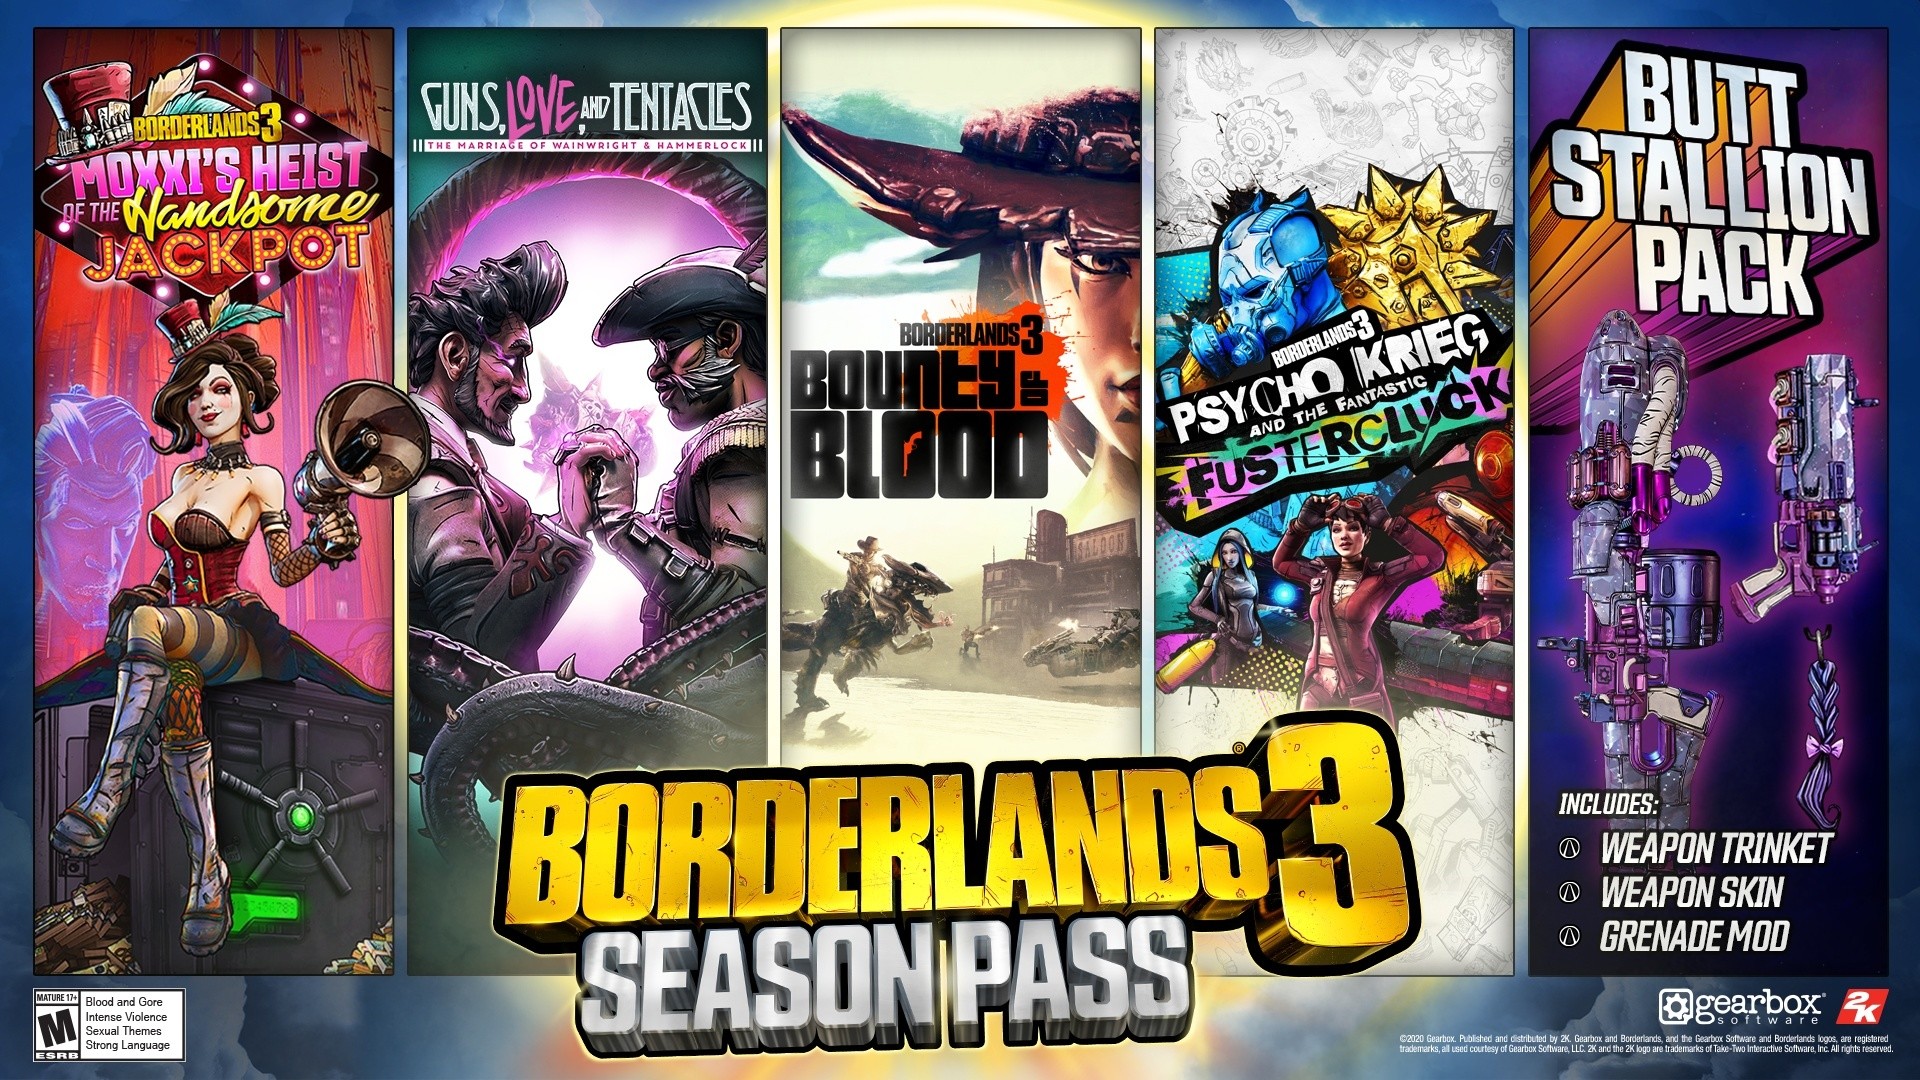 tales from the borderlands game pc full episodes 1 2 3 4 5